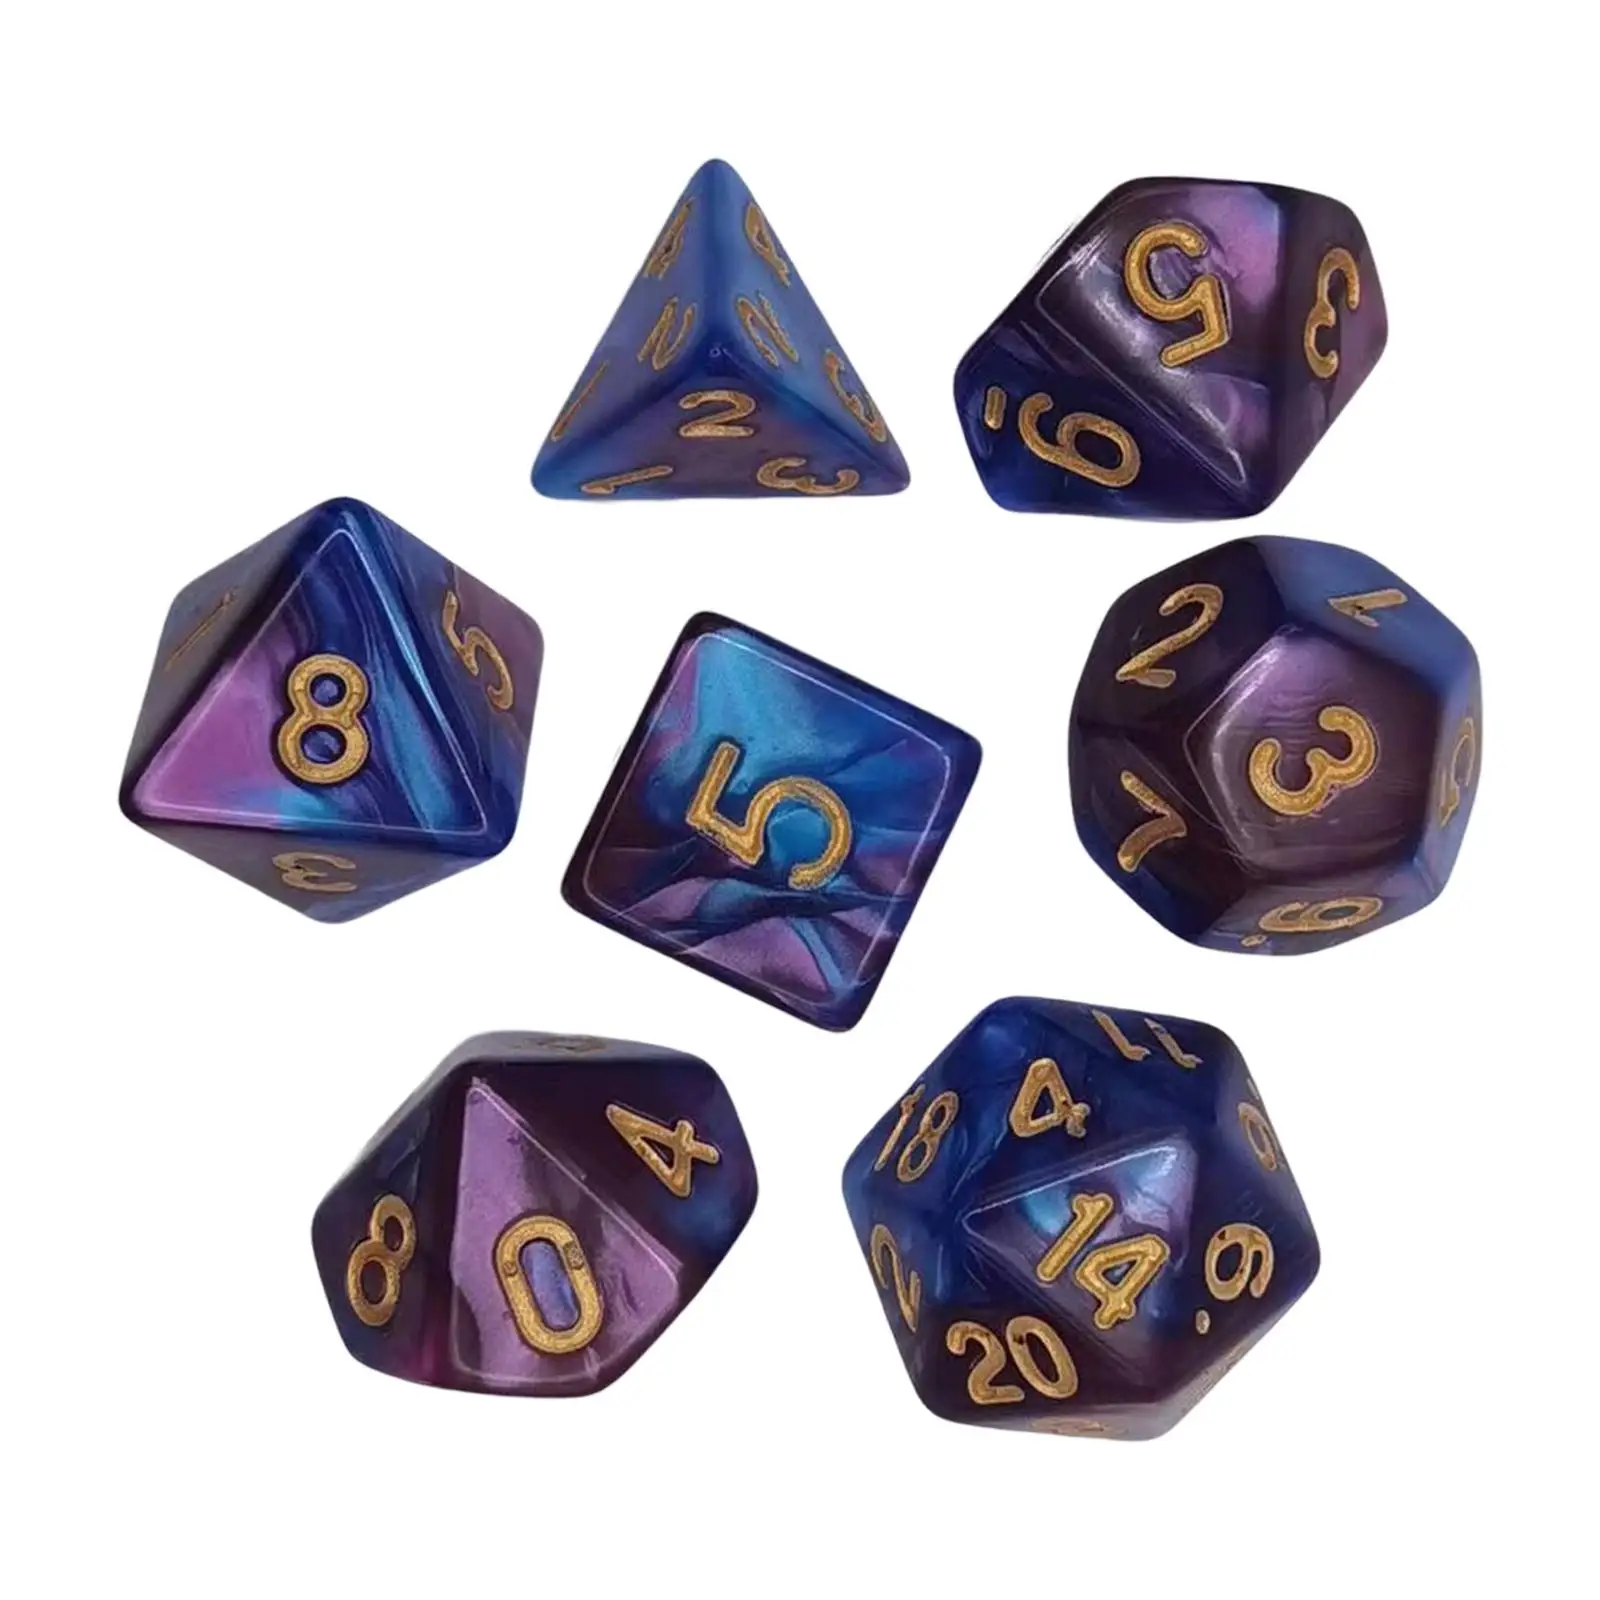 7 Pieces Colorful Polyhedral Dices Collectibles Polyhedron Dice Gifts D6 D4 D8 D10 D12 D20 for Tabletop Games Family Gathering